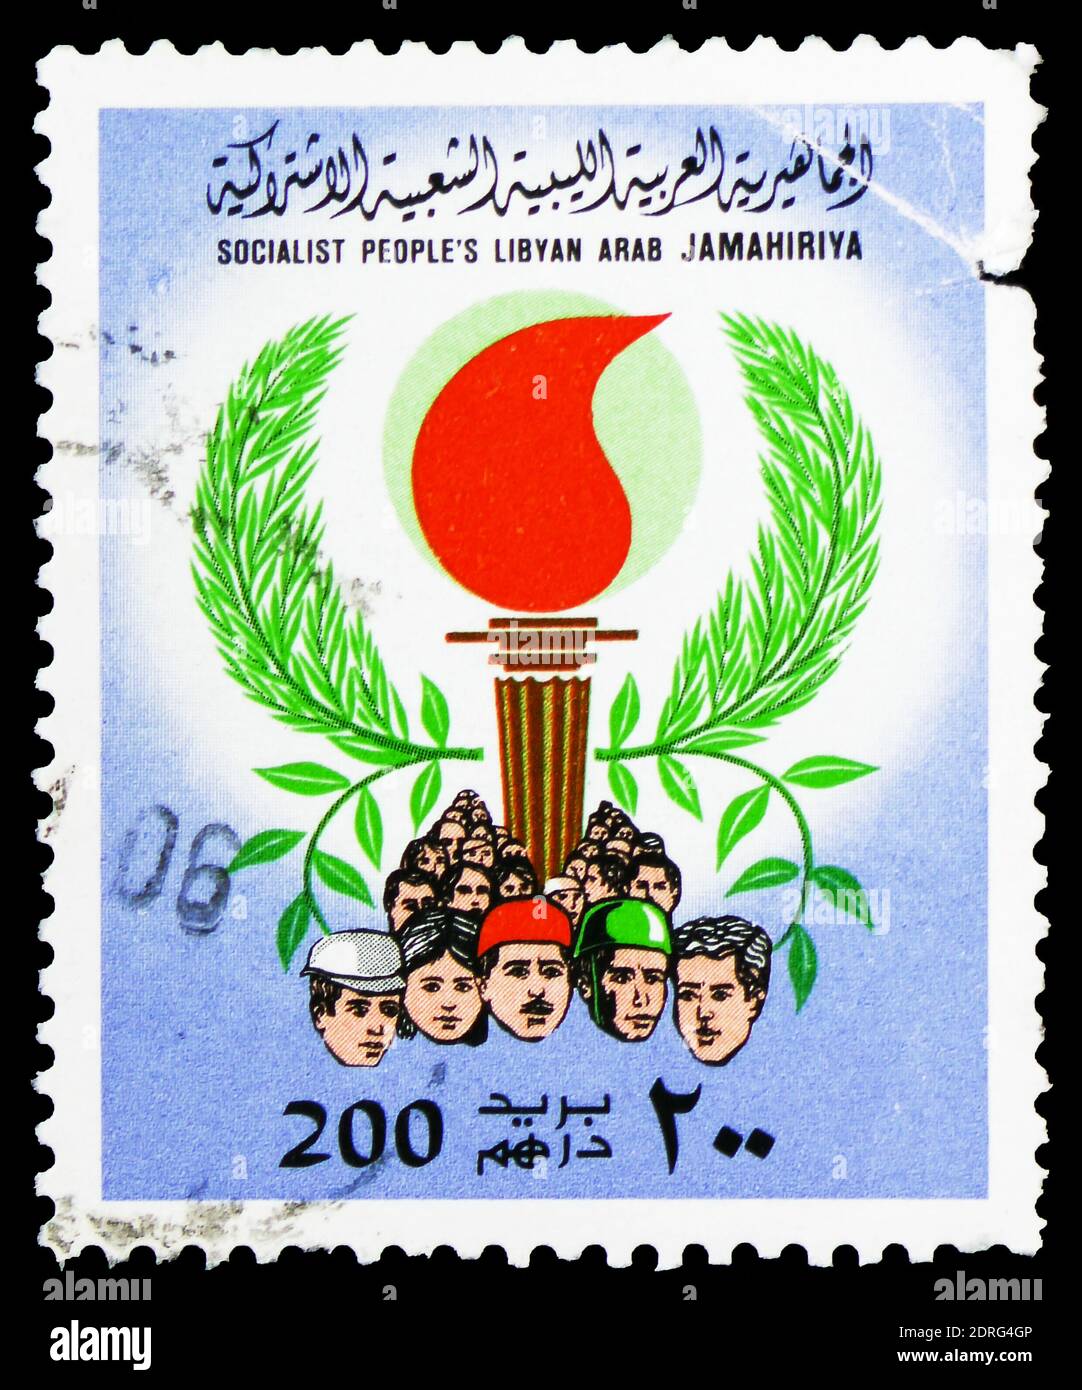 MOSCOW, RUSSIA - FEBRUARY 10, 2019: A stamp printed in Libyan Arab Jamahiriya shows People, Torch, Olive Branches, Burning Torch serie, circa 1979 Stock Photo